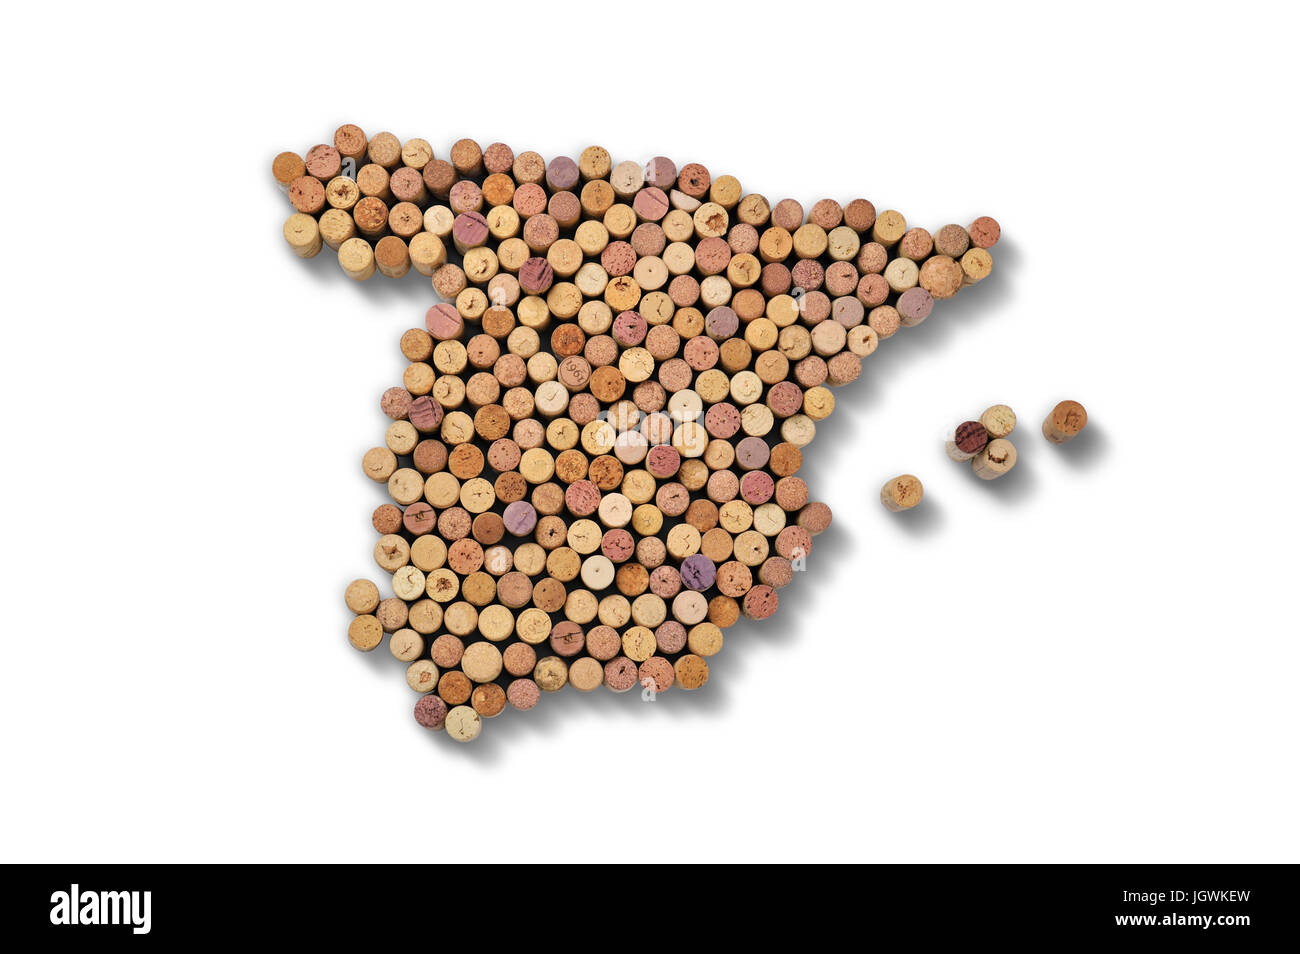 Wine-producing countries - maps from wine corks. Map of Spain on white background. Stock Photo